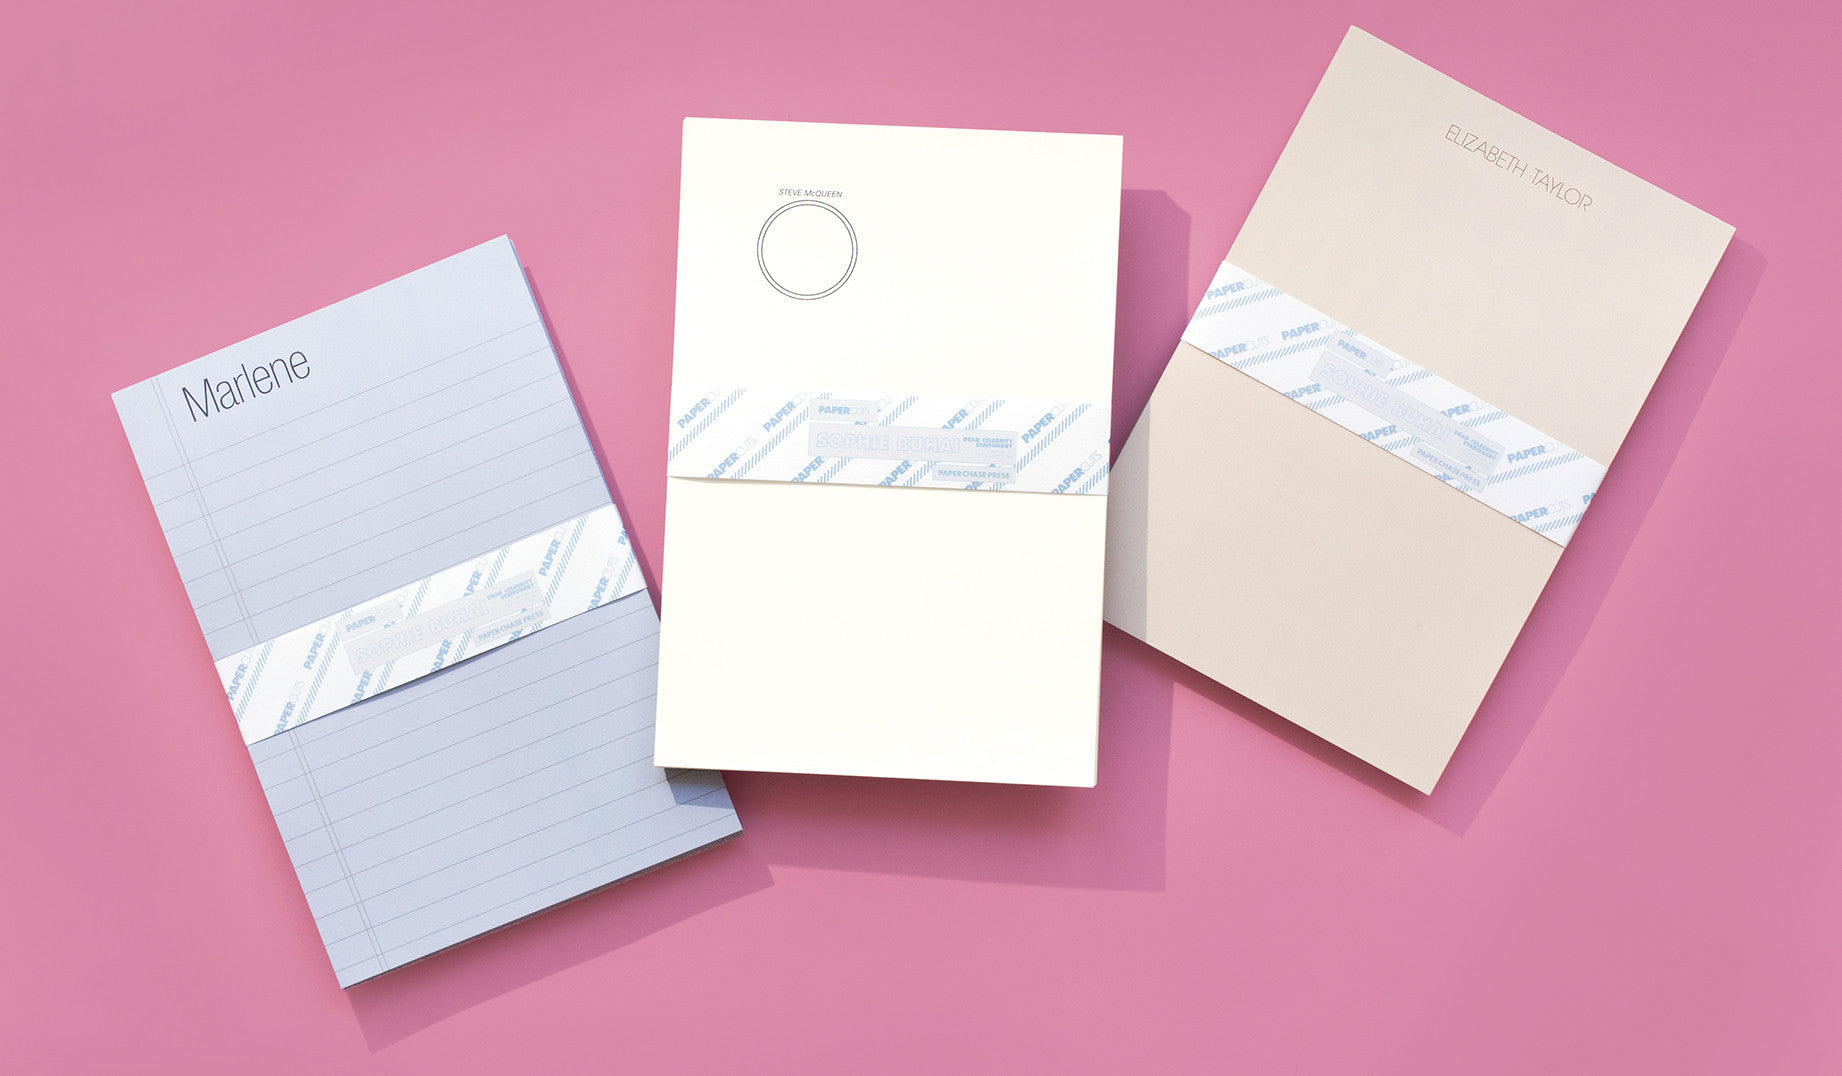 Based on the letterhead of celebrities Marlene Dietrich, Elizabeth Taylor, and Steve Mcqueen, these iconic stationery sets recall the glory days of Hollywood and letter writing. Choose your favorite and personalize the set with your own information to send a note in style. Printed on premium uncoated paper and sold in sets of fifty.